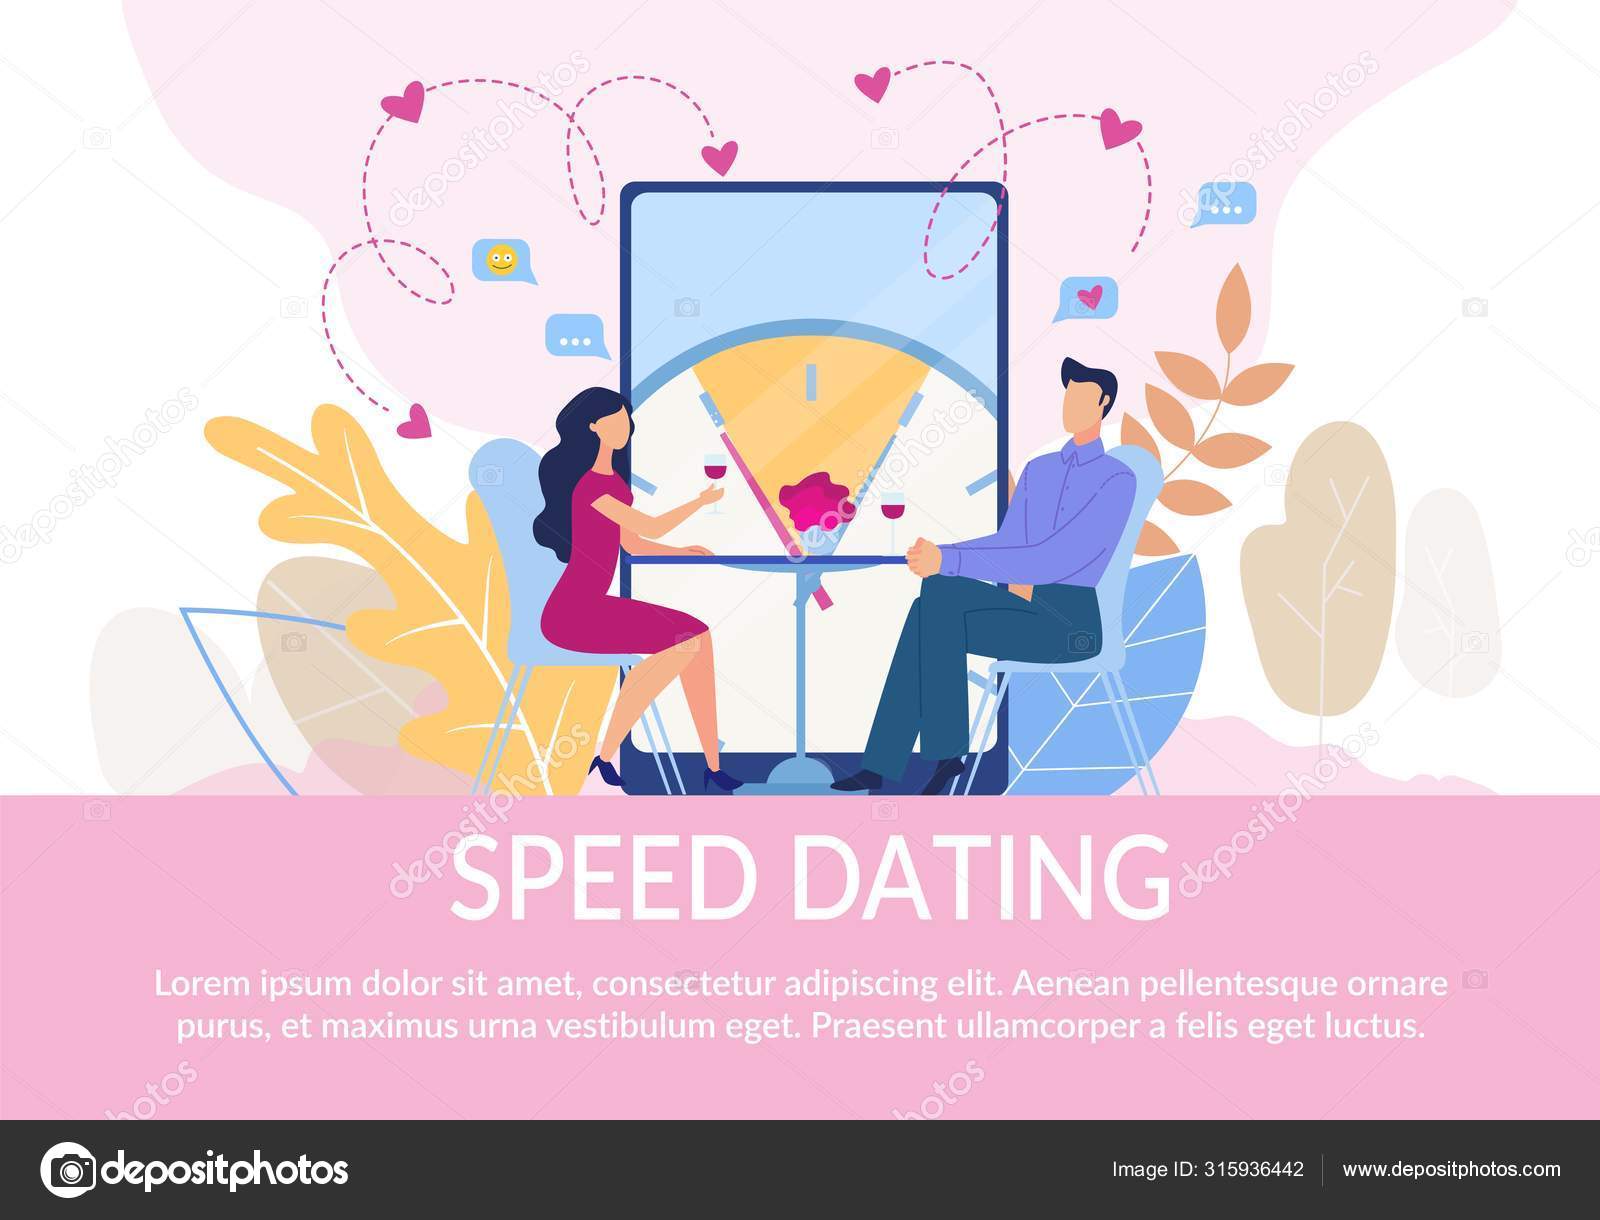 Speed Dating Images Cartoons